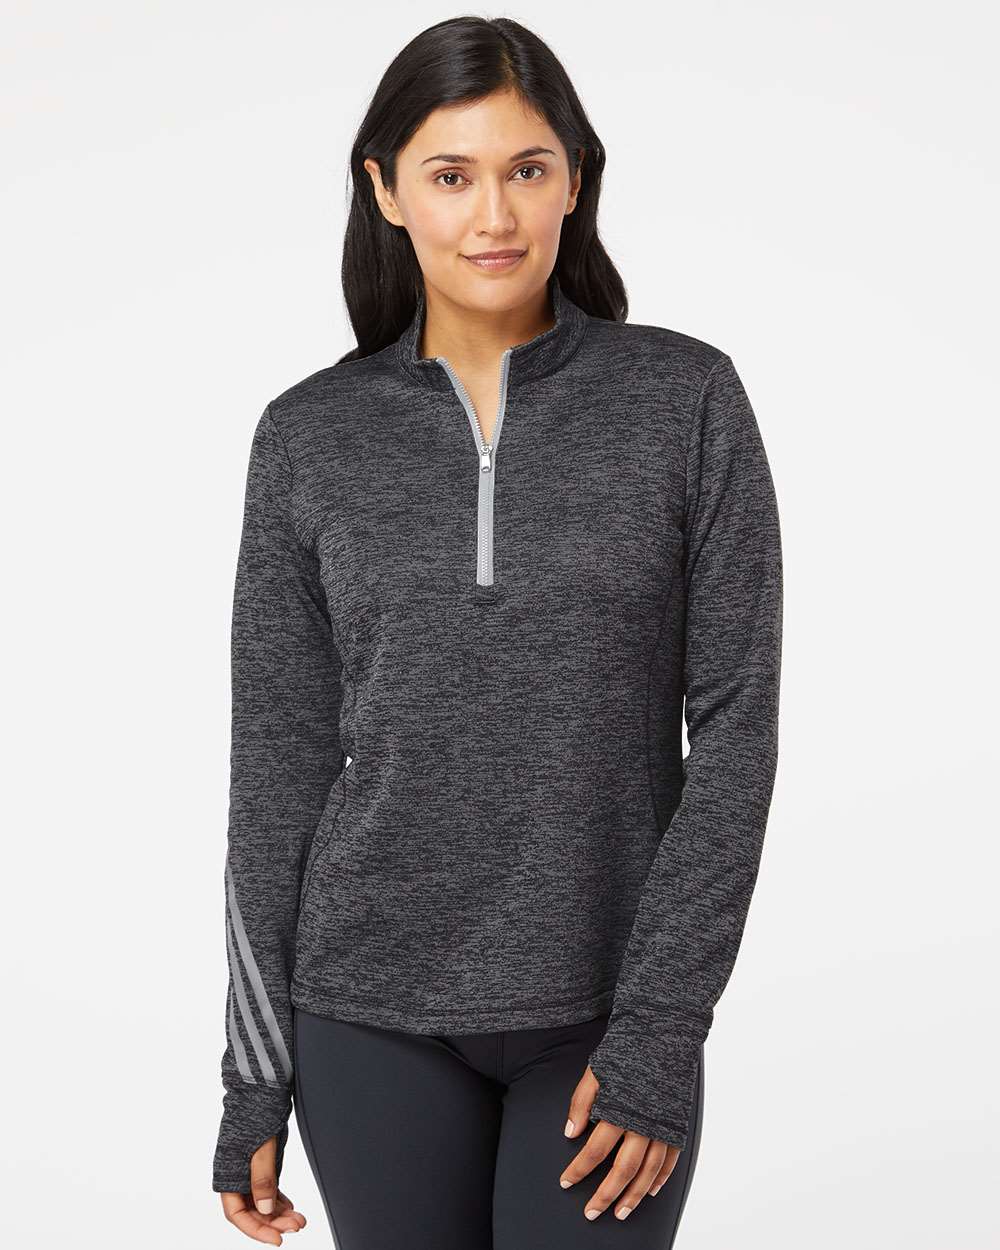 Brushed Terry Heathered Quarter-Zip Ladies Pullover - Adidas A285